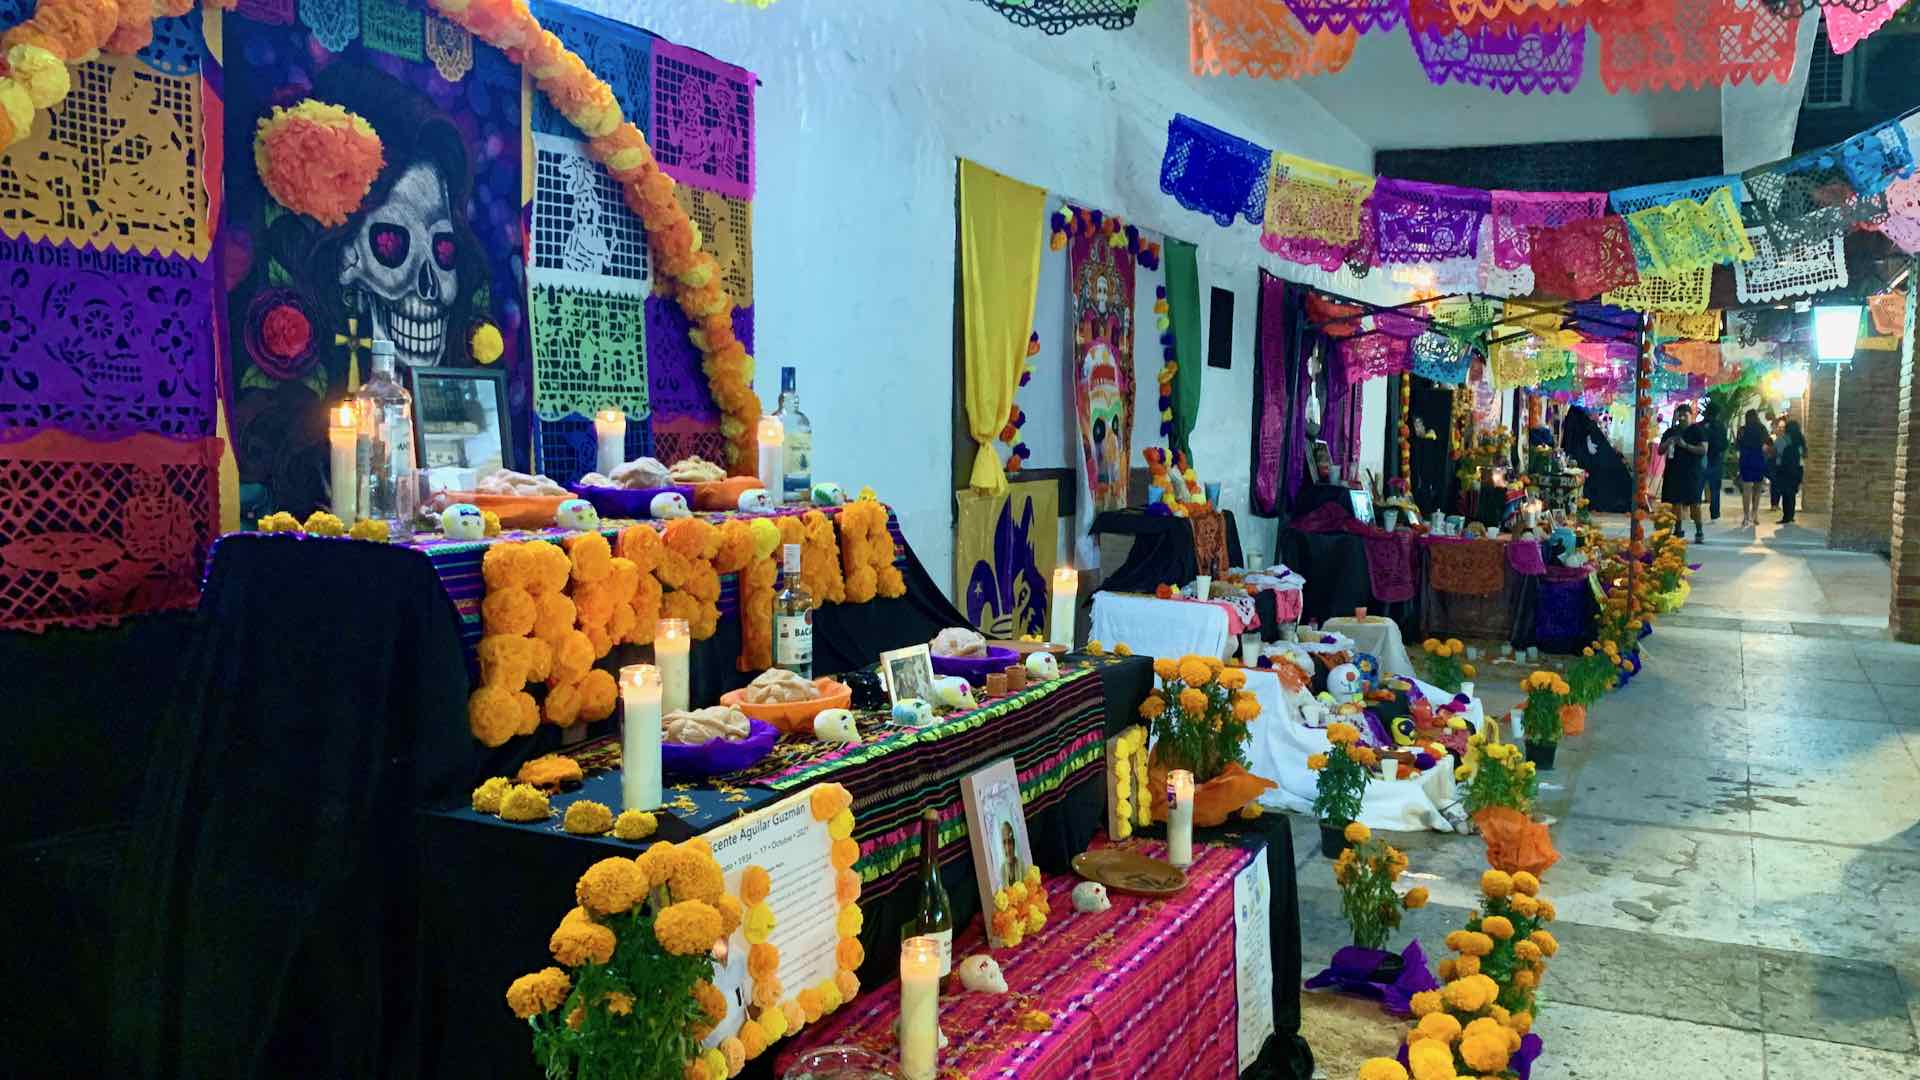 The Day of the Dead can't be experienced any better than in Mexico...and Puerto Vallarta really does it well! It's a family day, and a day of remembrance.